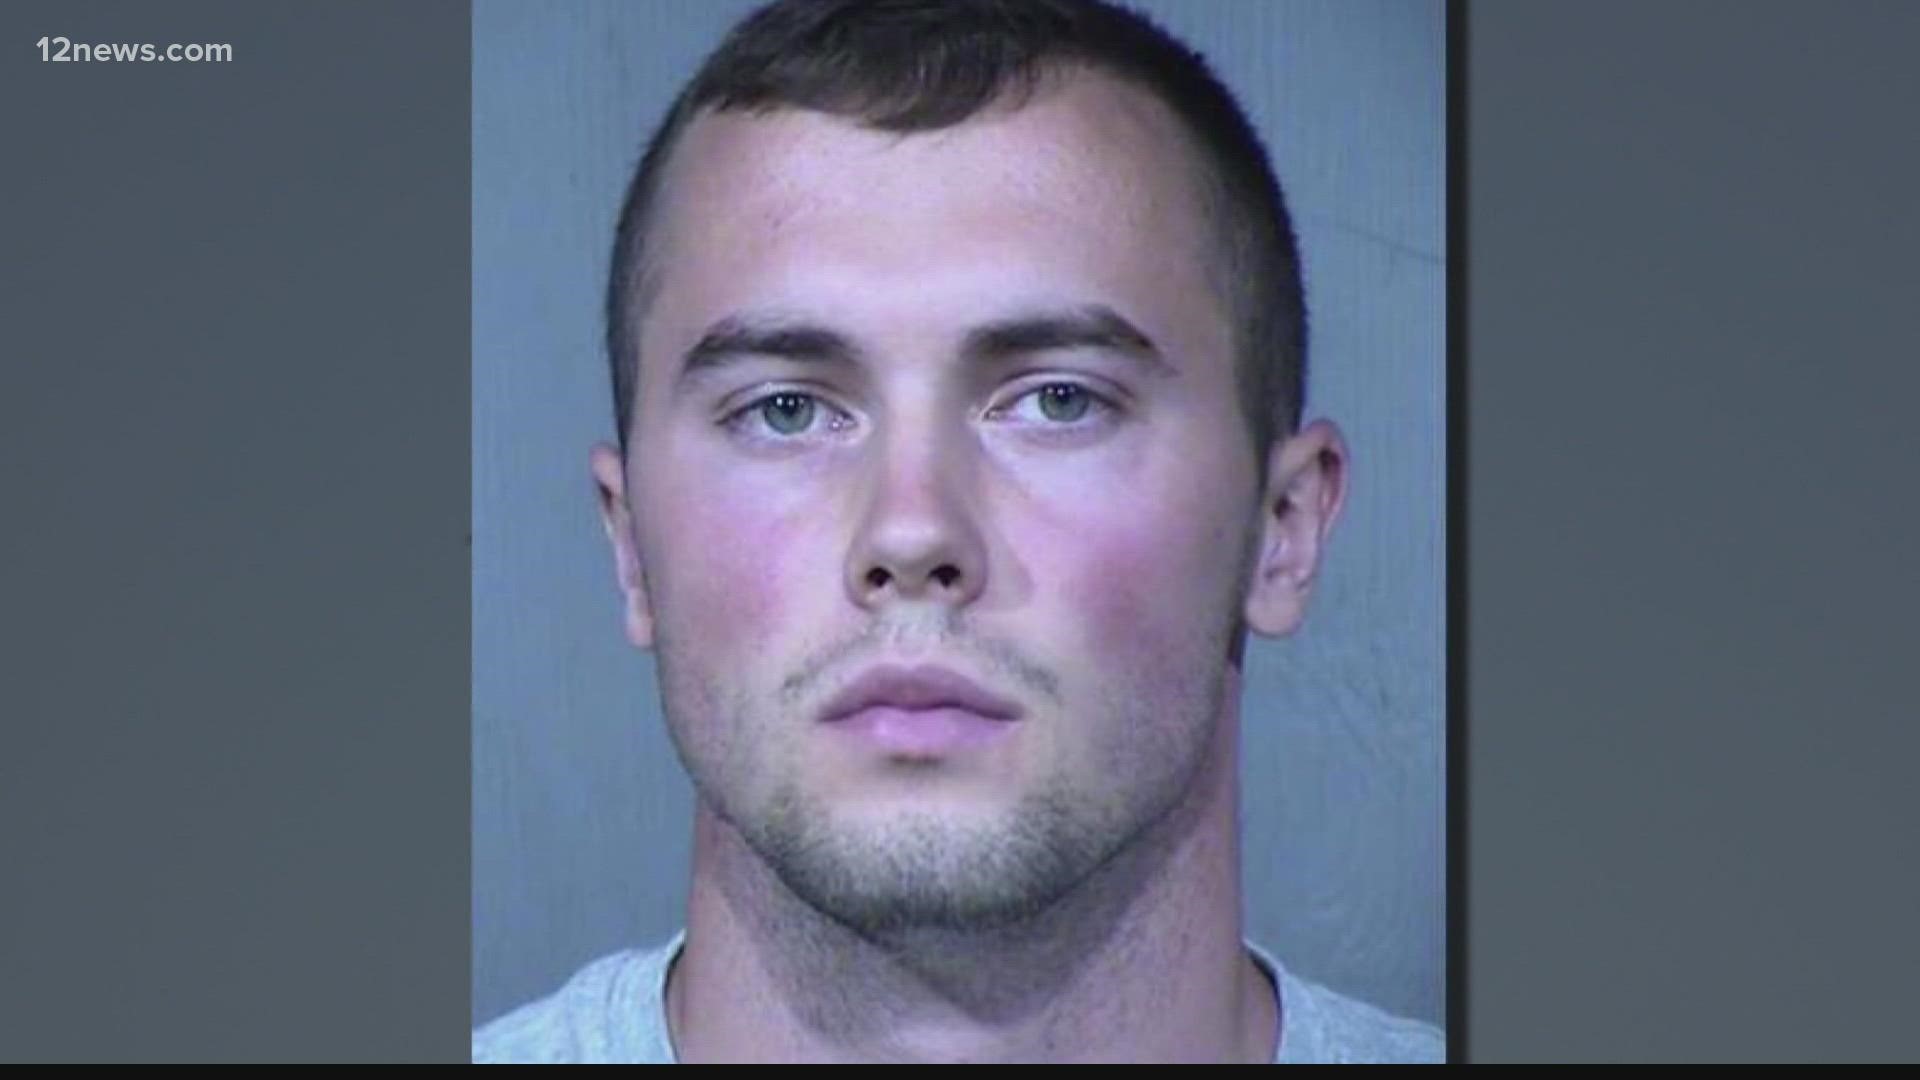 Mark Gooch, an Air Force airman convicted of kidnapping and killing a Mennonite woman, was sentenced to natural life in prison in an Arizona courtroom.